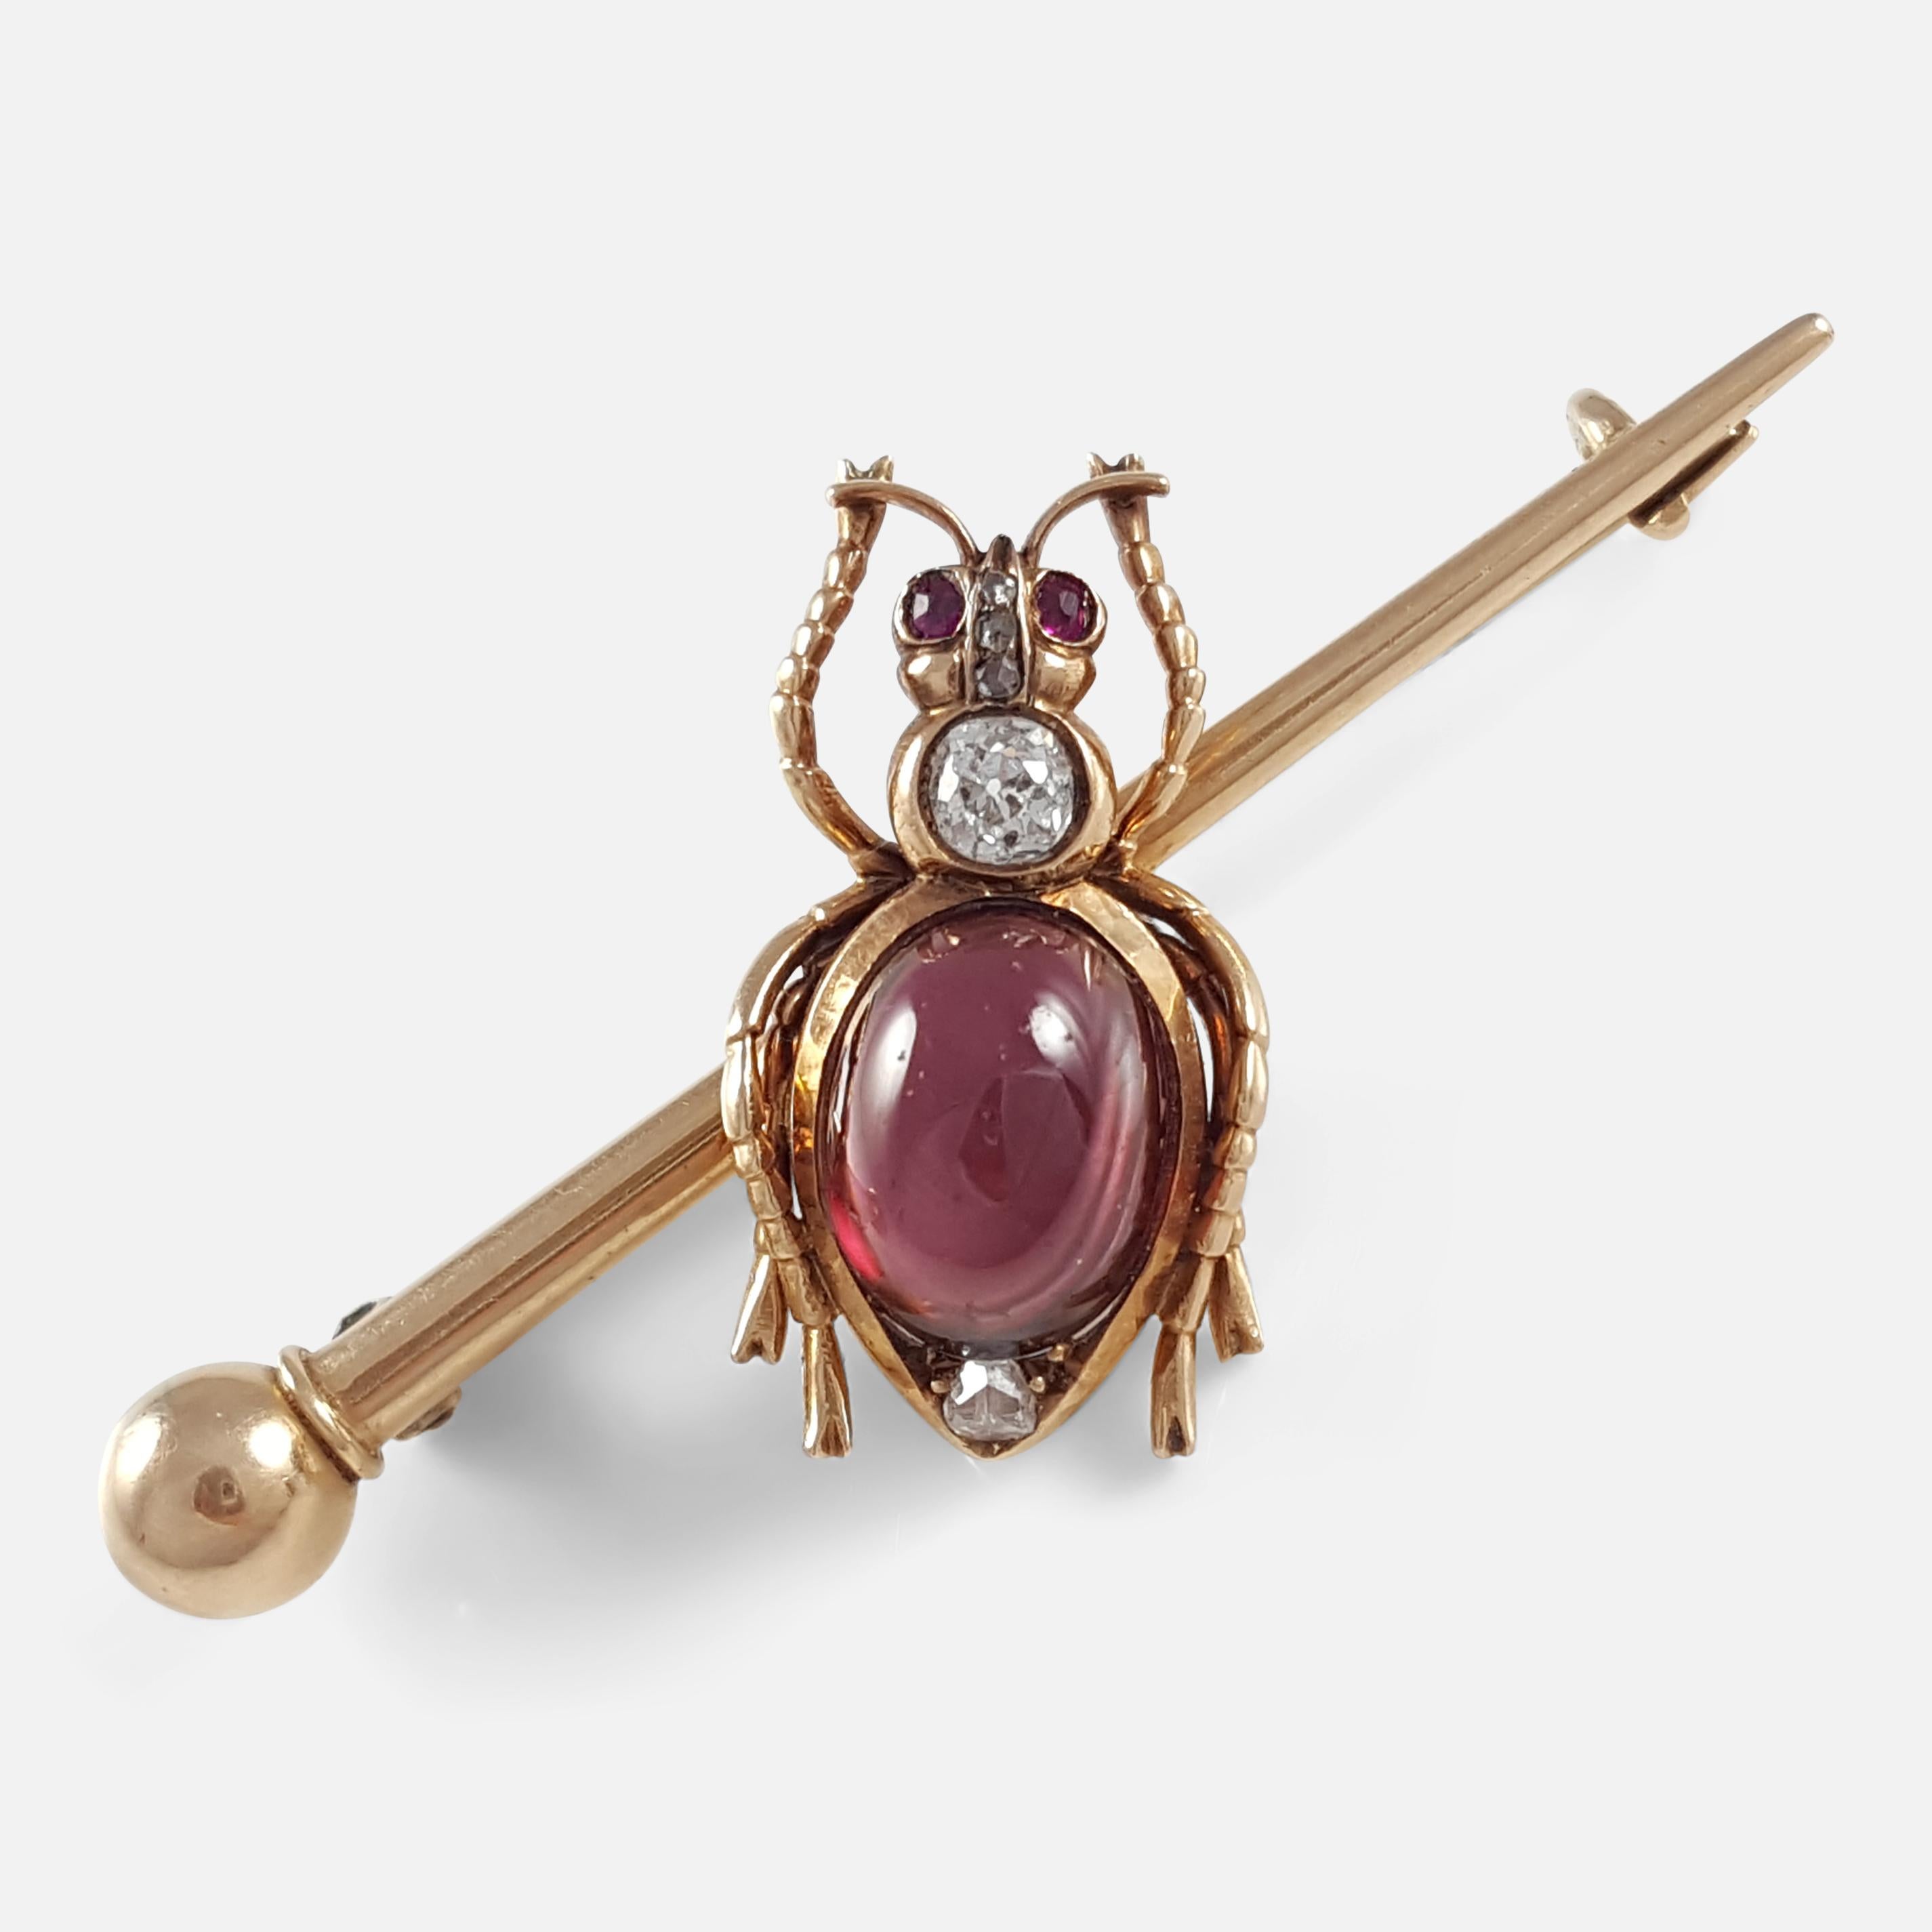 A beautiful Russian 14k yellow gold 0.20cts diamond, and garnet cabochon insect brooch - circa 1895. The brooch is crafted in 14k gold, with garnet cabochons, and diamonds set to the body, and head. The brooch is stamped to the C clasp with the